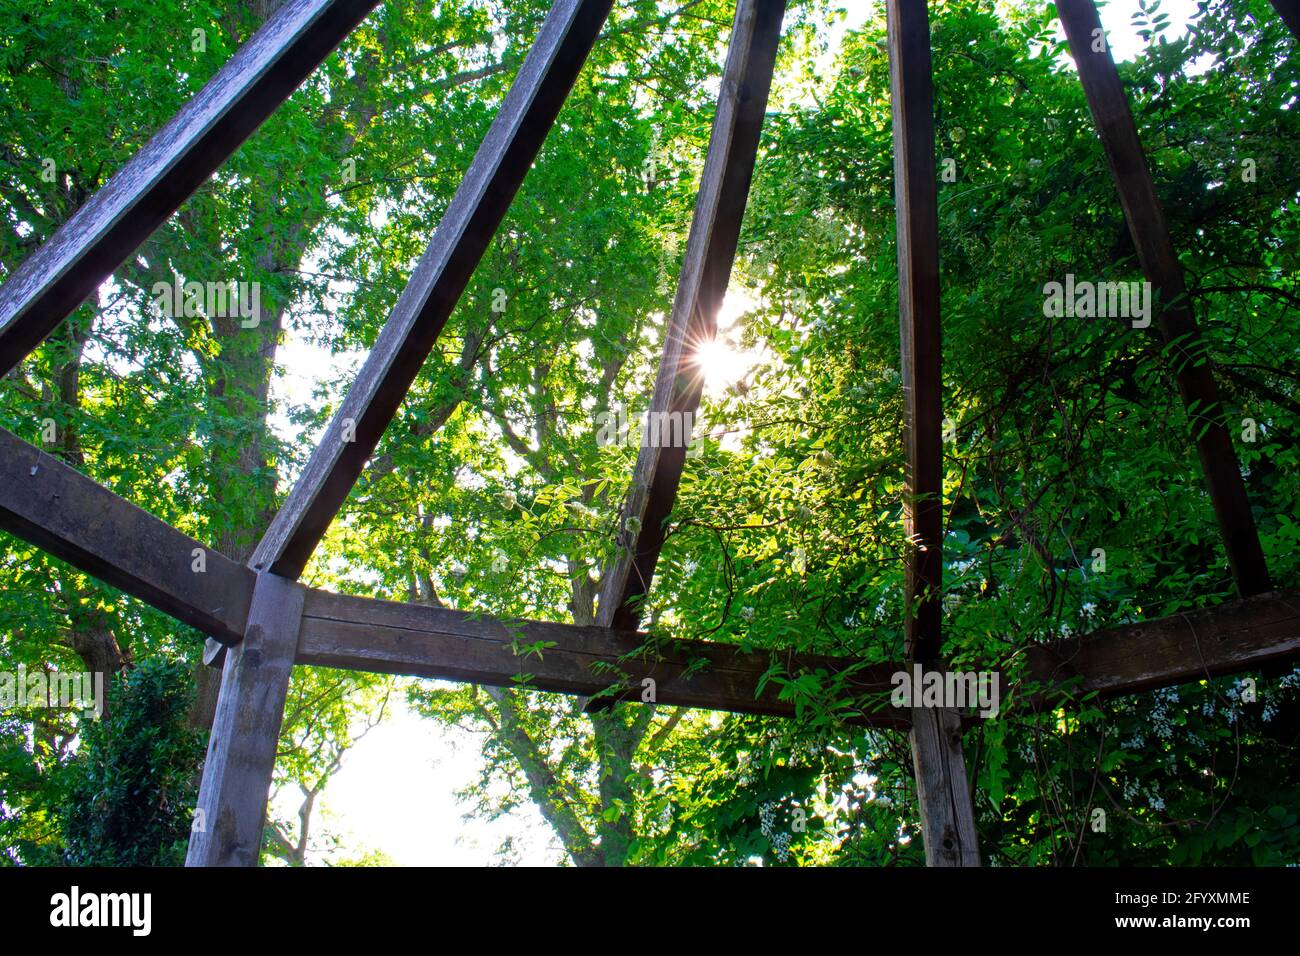 Looking out through the rafters to a sunburst treeline from a gazebo at Rutgers Gardens in New Brunswick, New Jersey -04 Stock Photo